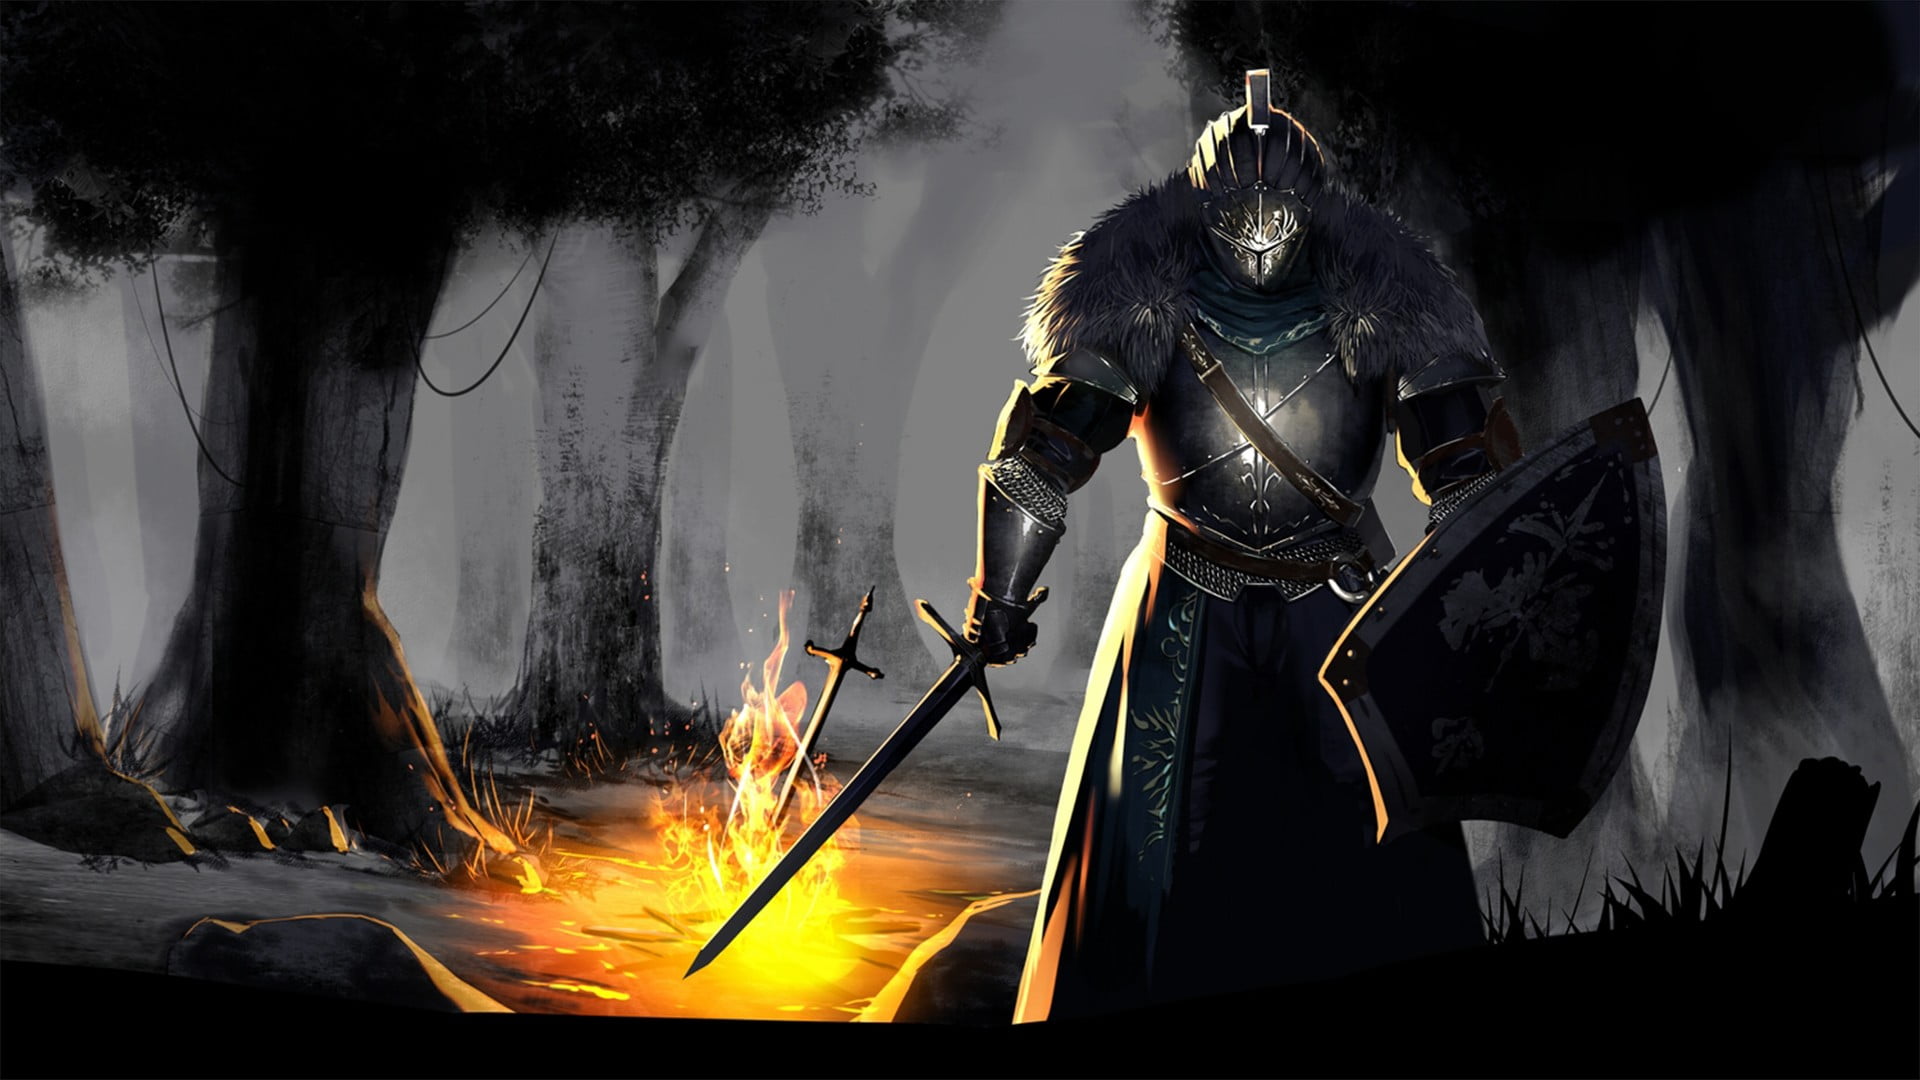 armor animated character wallpaper, fire, sword, Dark Souls, forest